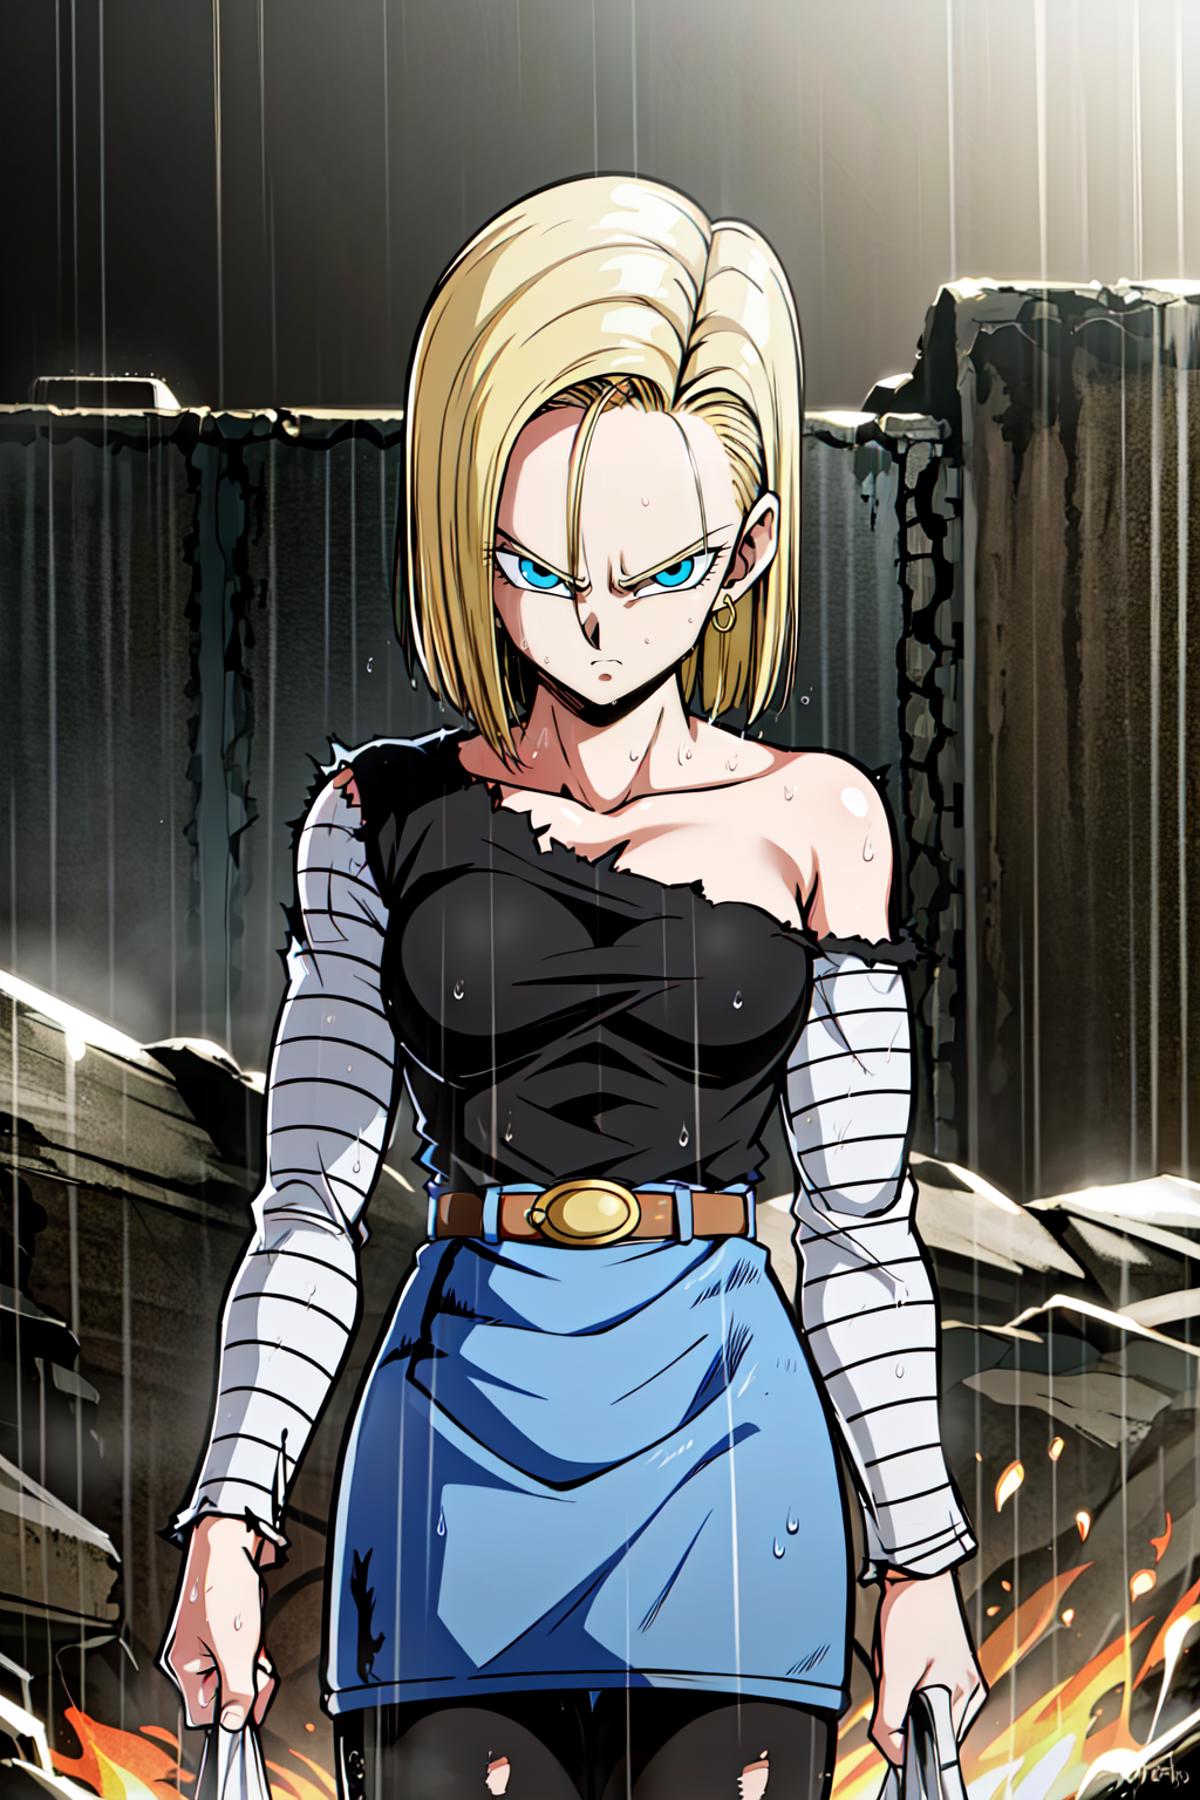 Android 18 - Dragon Ball Z image by HerschelLeVerrier